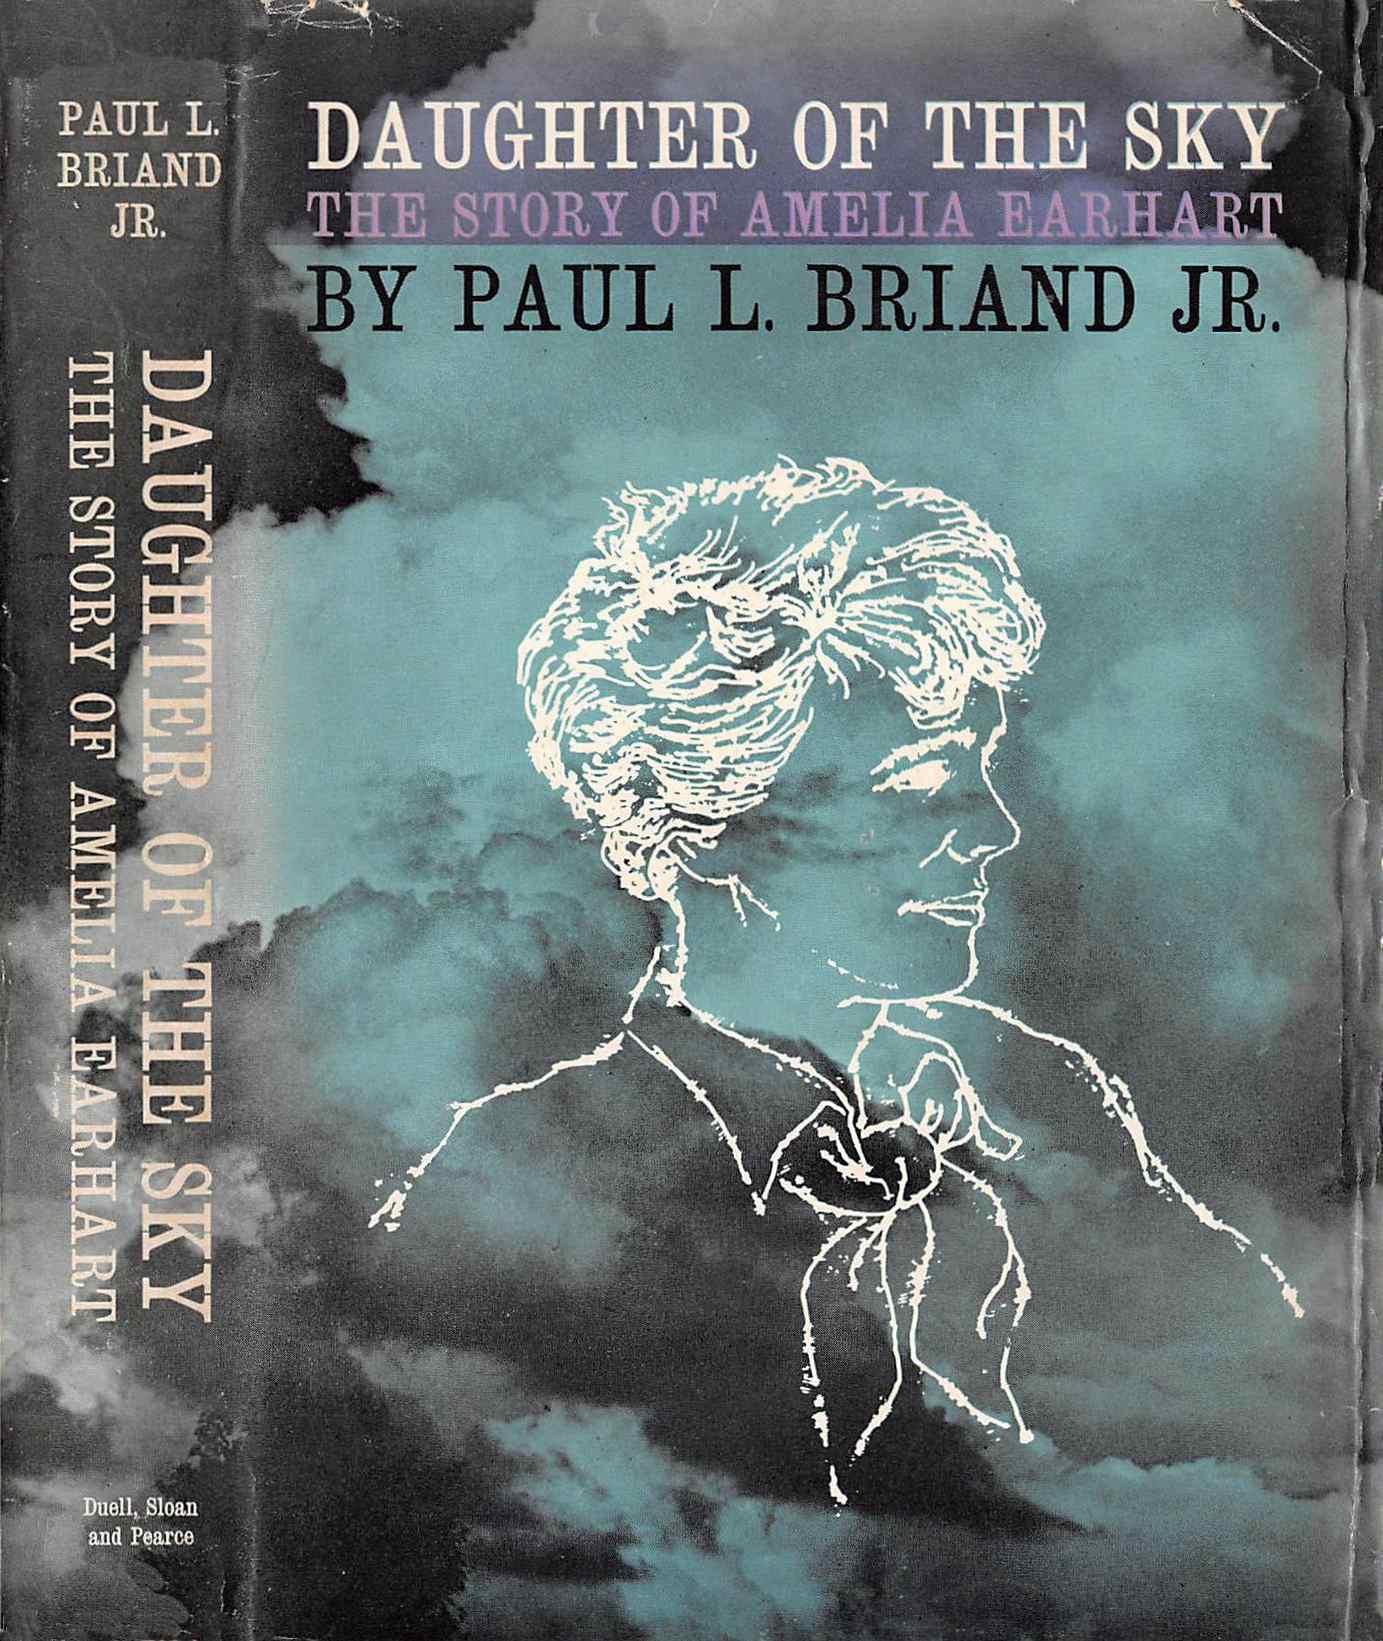 Daughter of the Sky Project Gutenberg